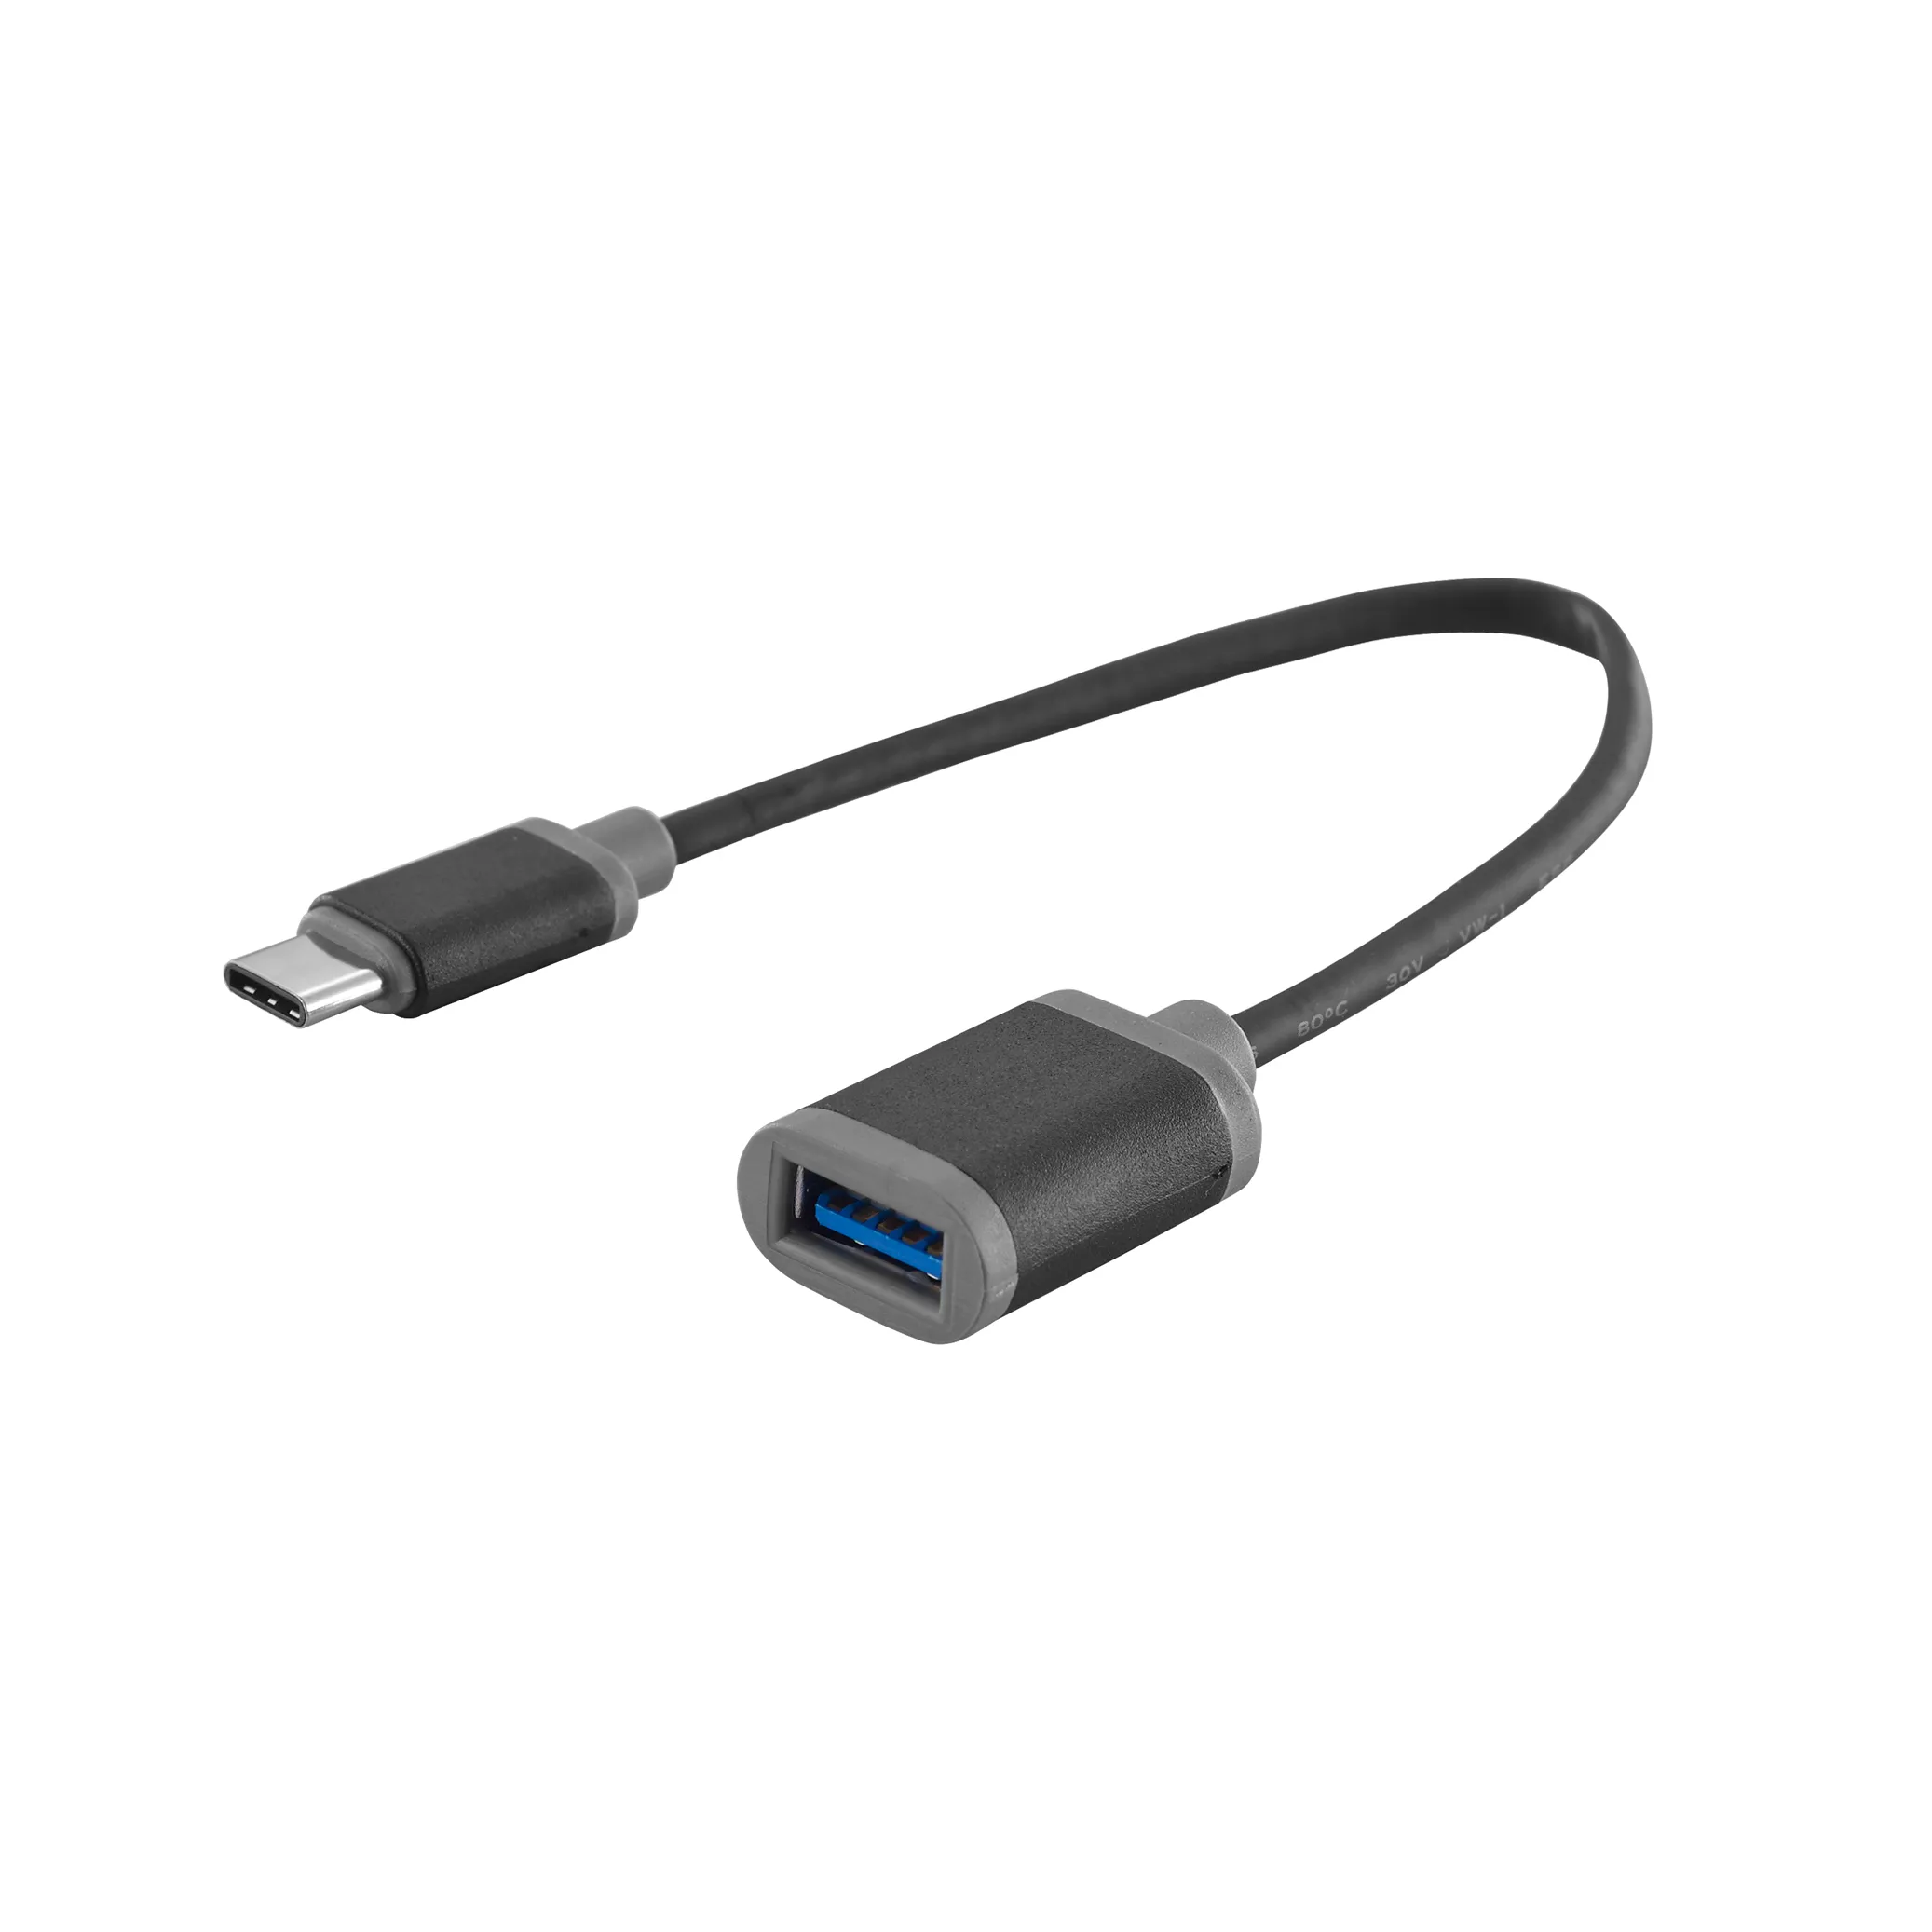 USB Type C to USB Type A OTG adapter cable for Computer